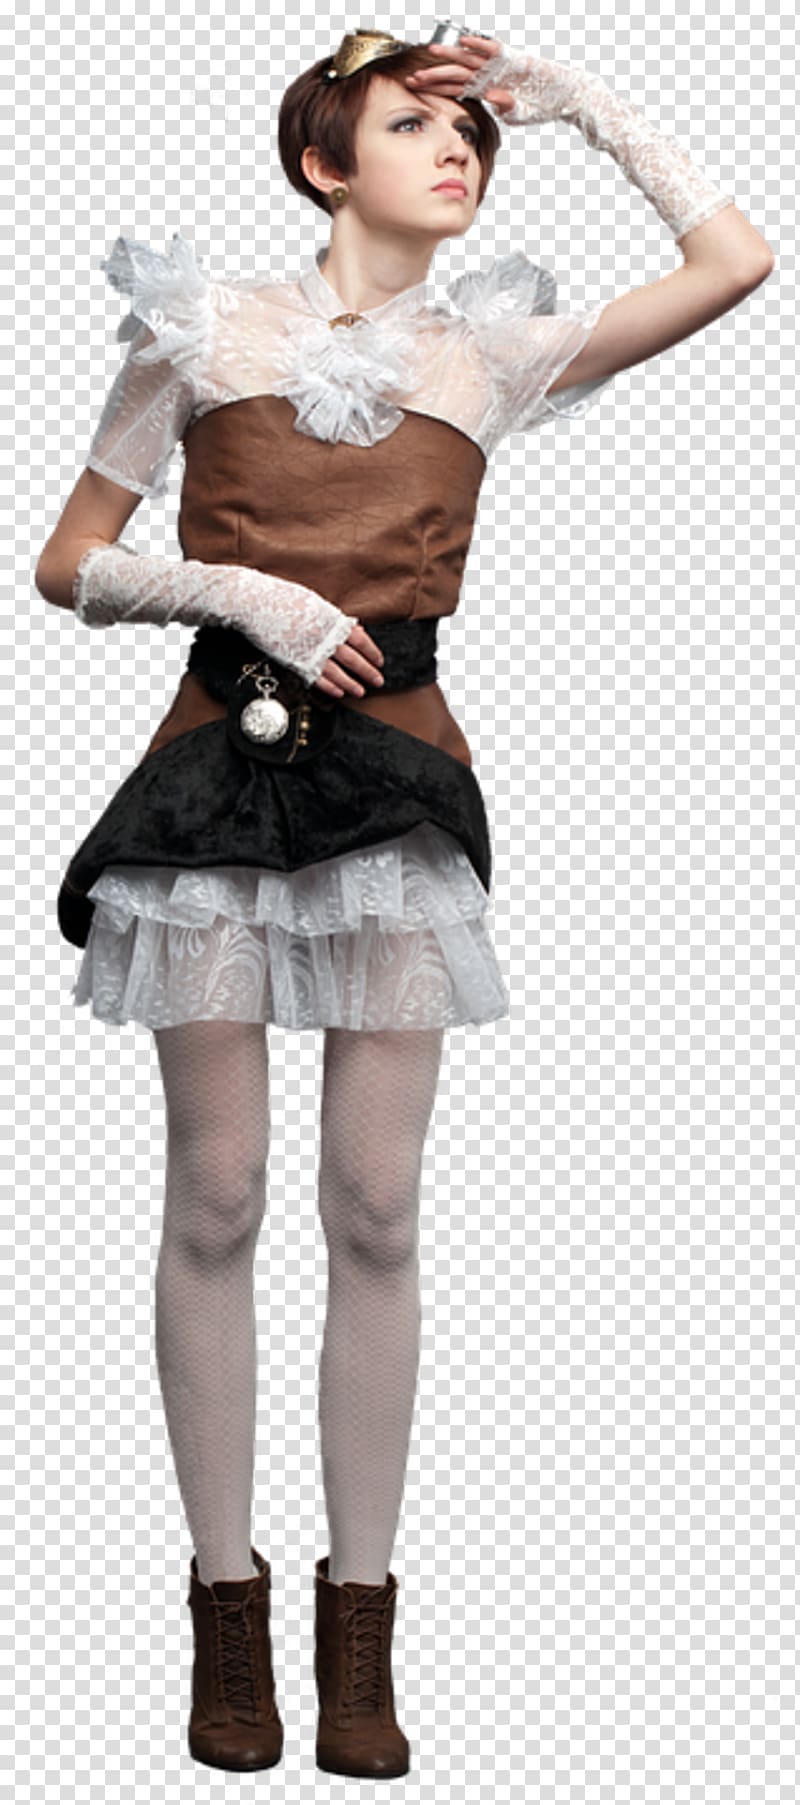 Steampunk fashion Costume Clothing, woman transparent background PNG clipart